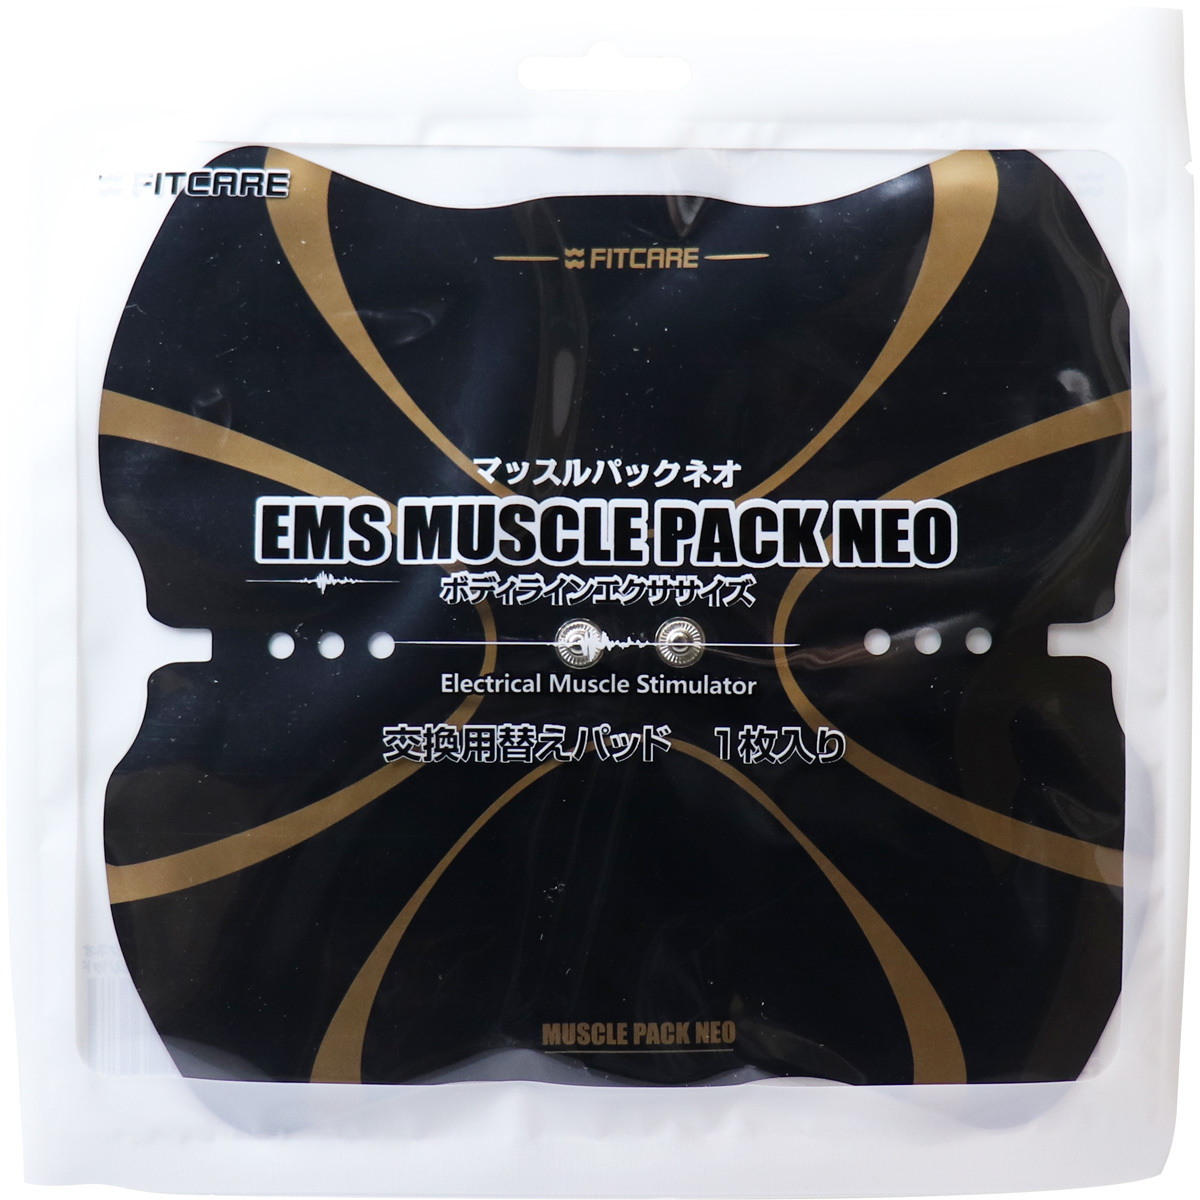  summarize profit EMS muscle pack Neo MEMO013-BK for exchange change pad 1 sheets insertion x [4 piece ] /k